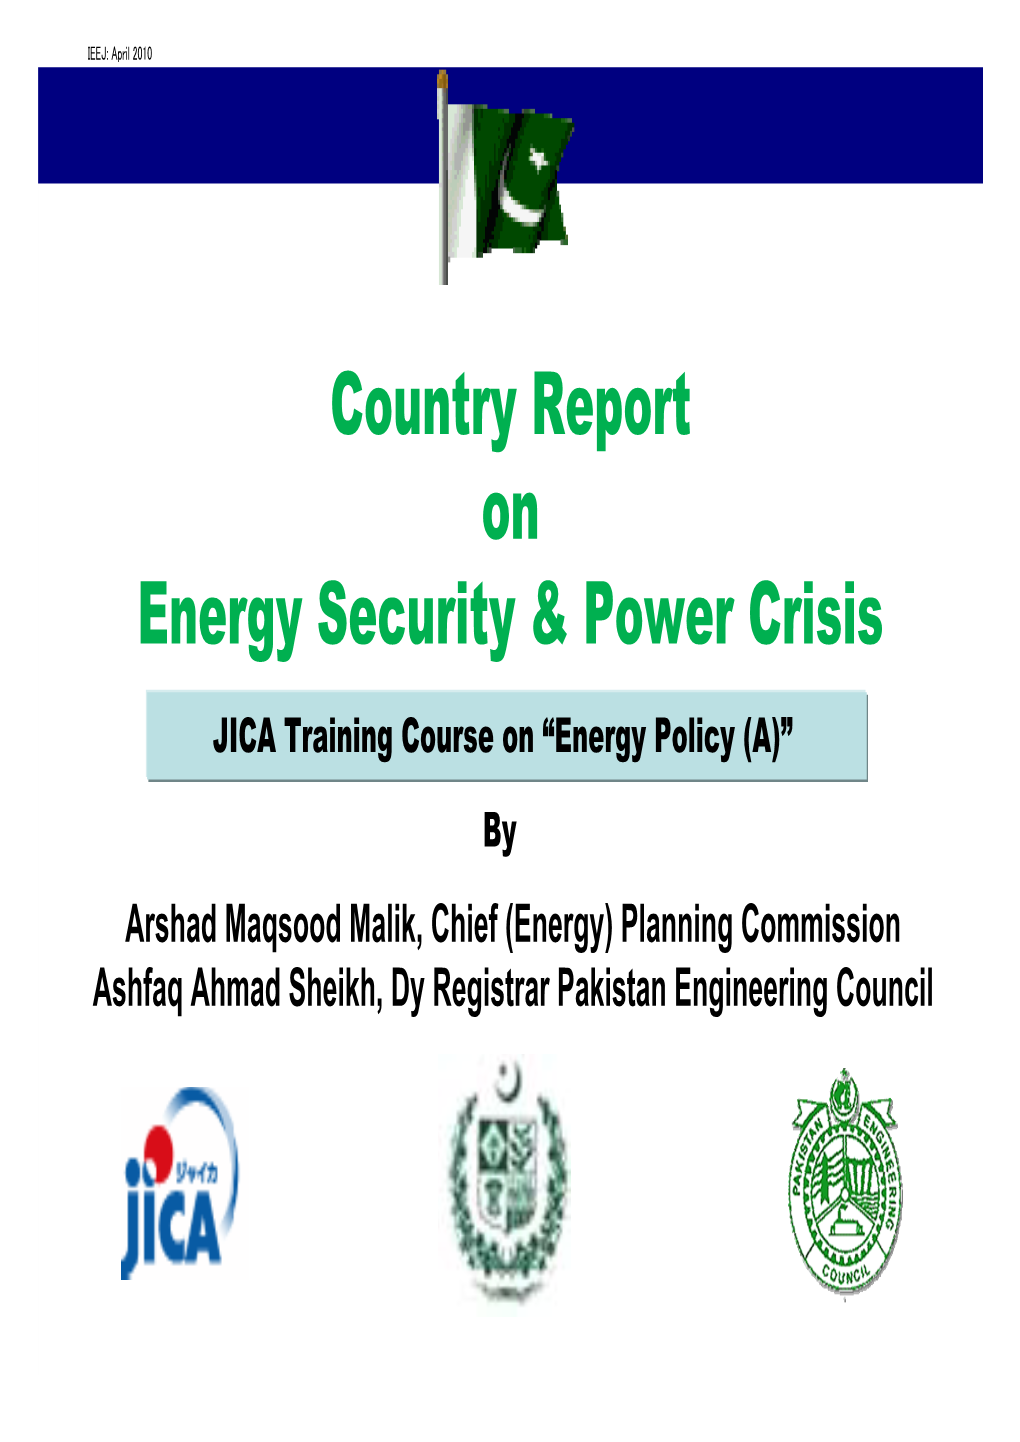 Country Report on Energy Security & Power Crisis